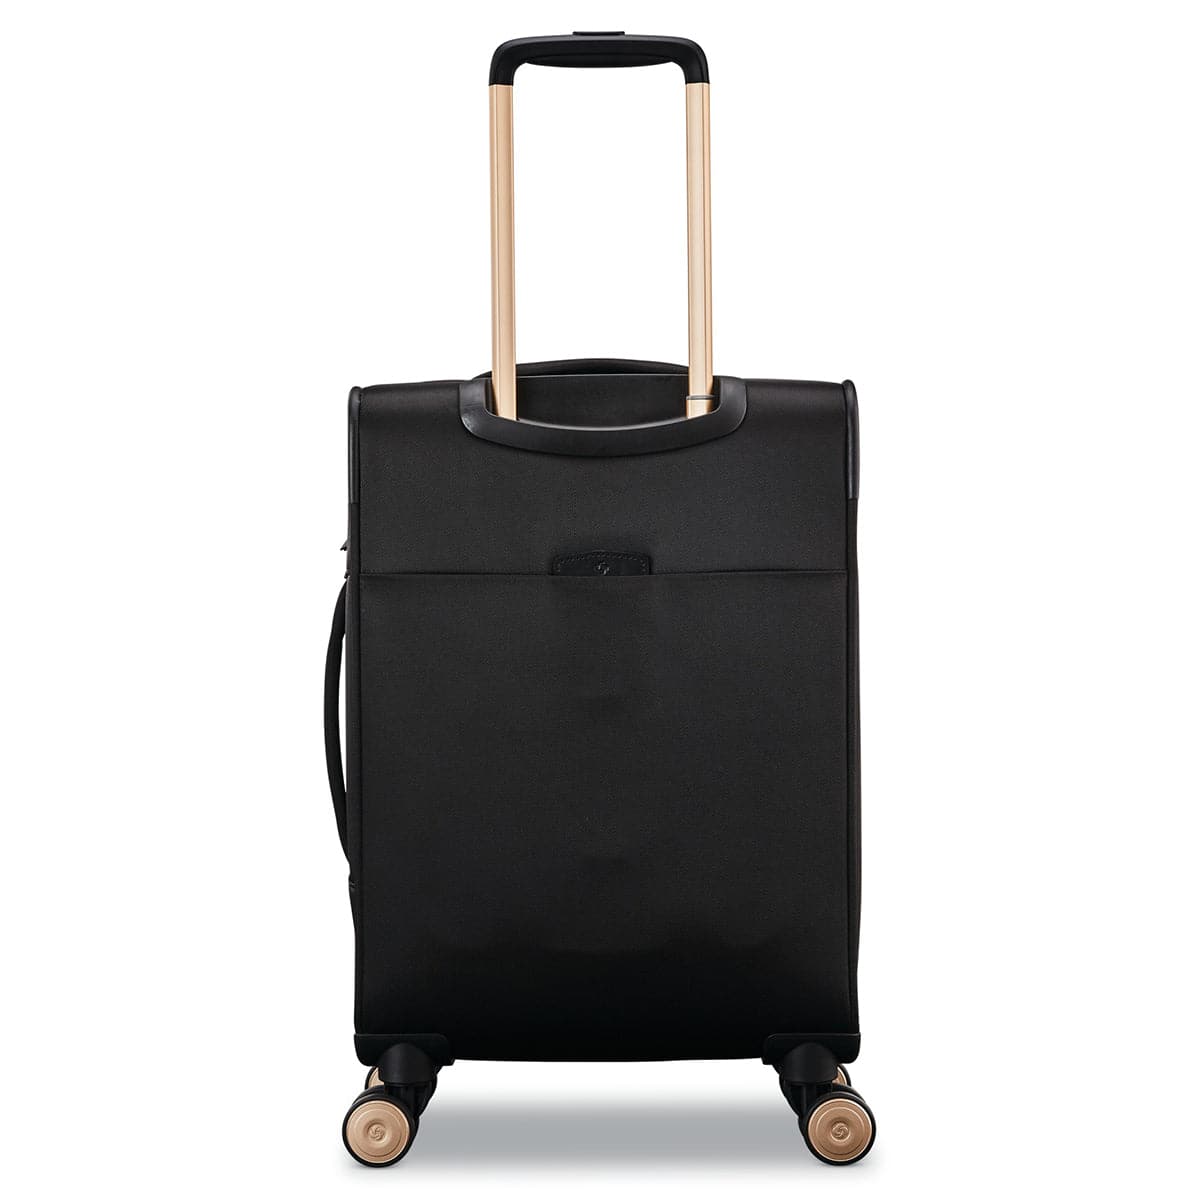 Samsonite Mobile Solution Softside Expandable 19" Spinner Carry-On Luggage